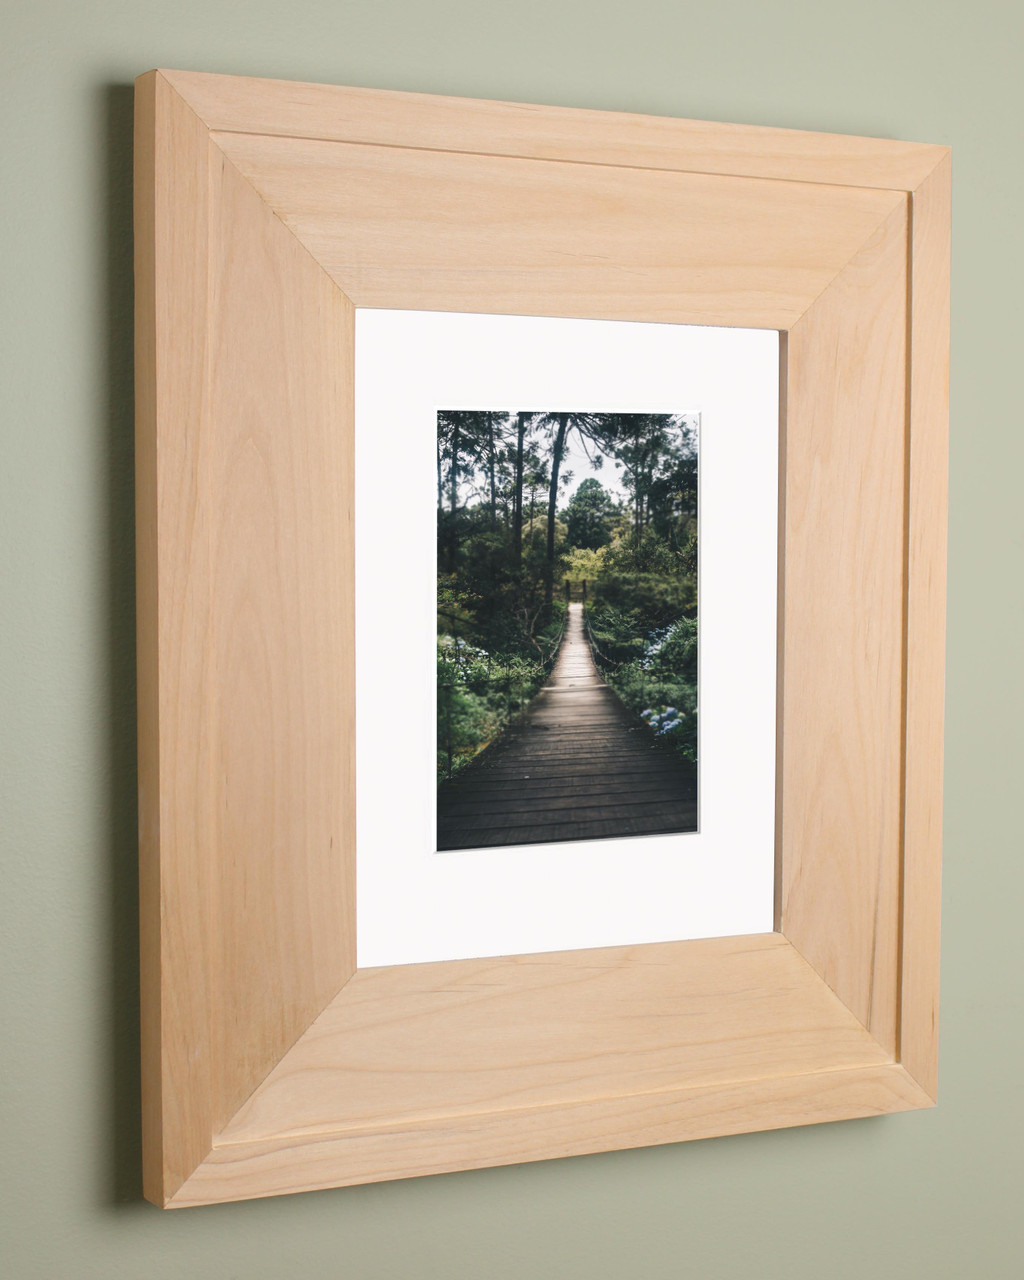 Compact Portrait White Contemporary Recessed Picture Frame